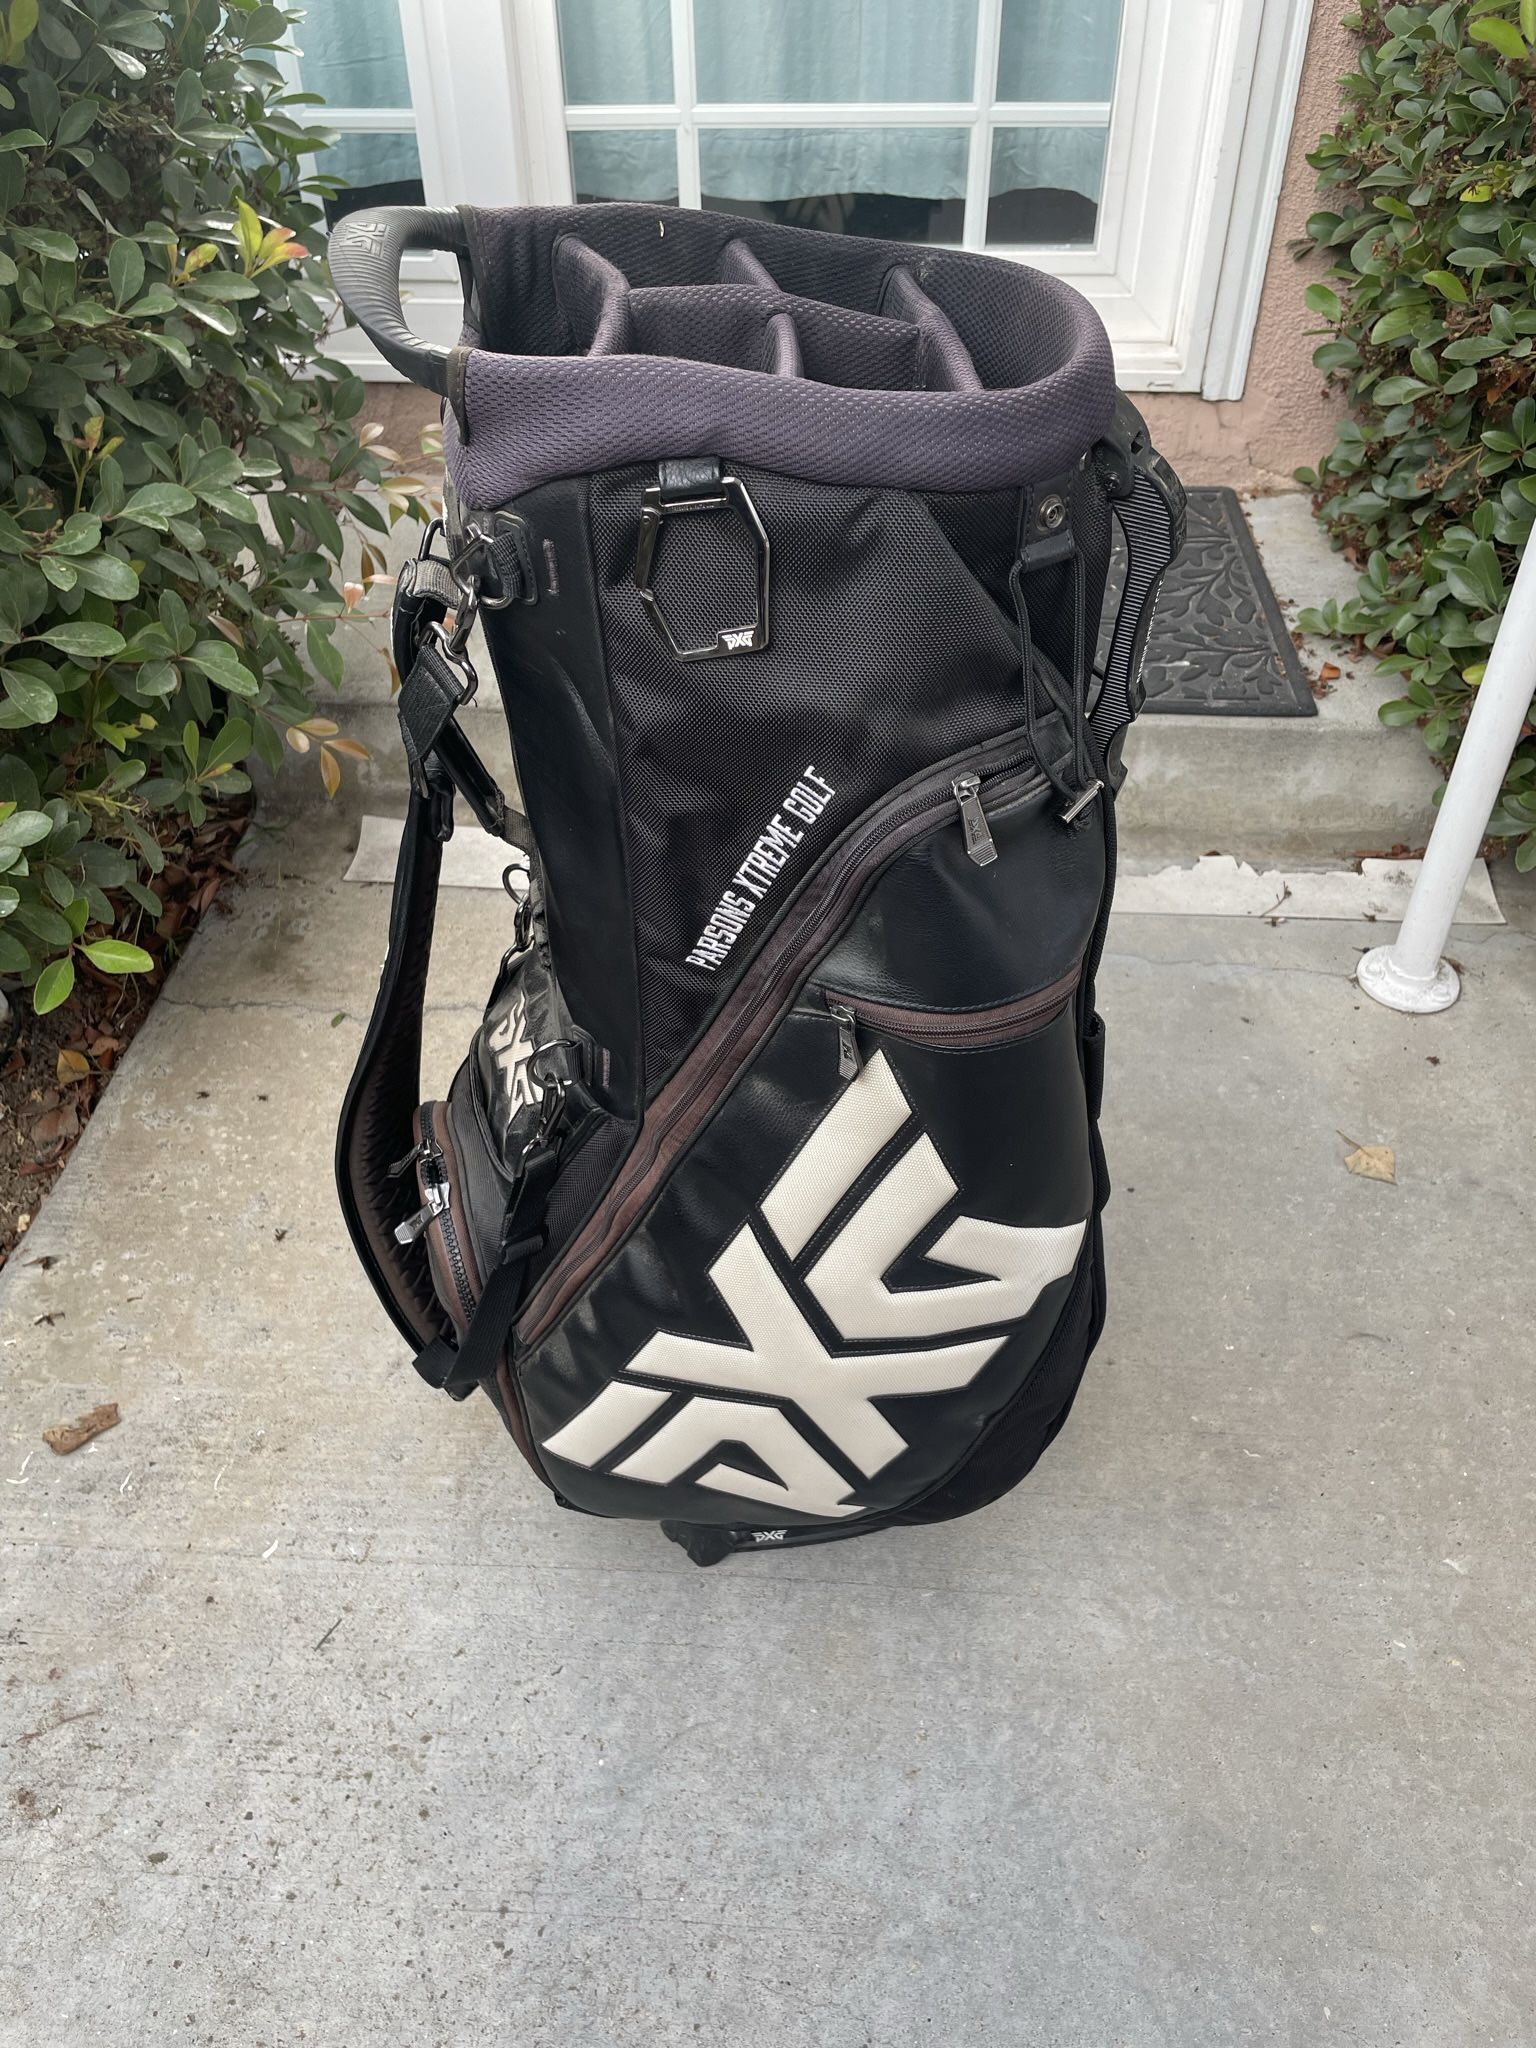 PXG Golf Bag! Message For Details for Sale in San Diego, CA